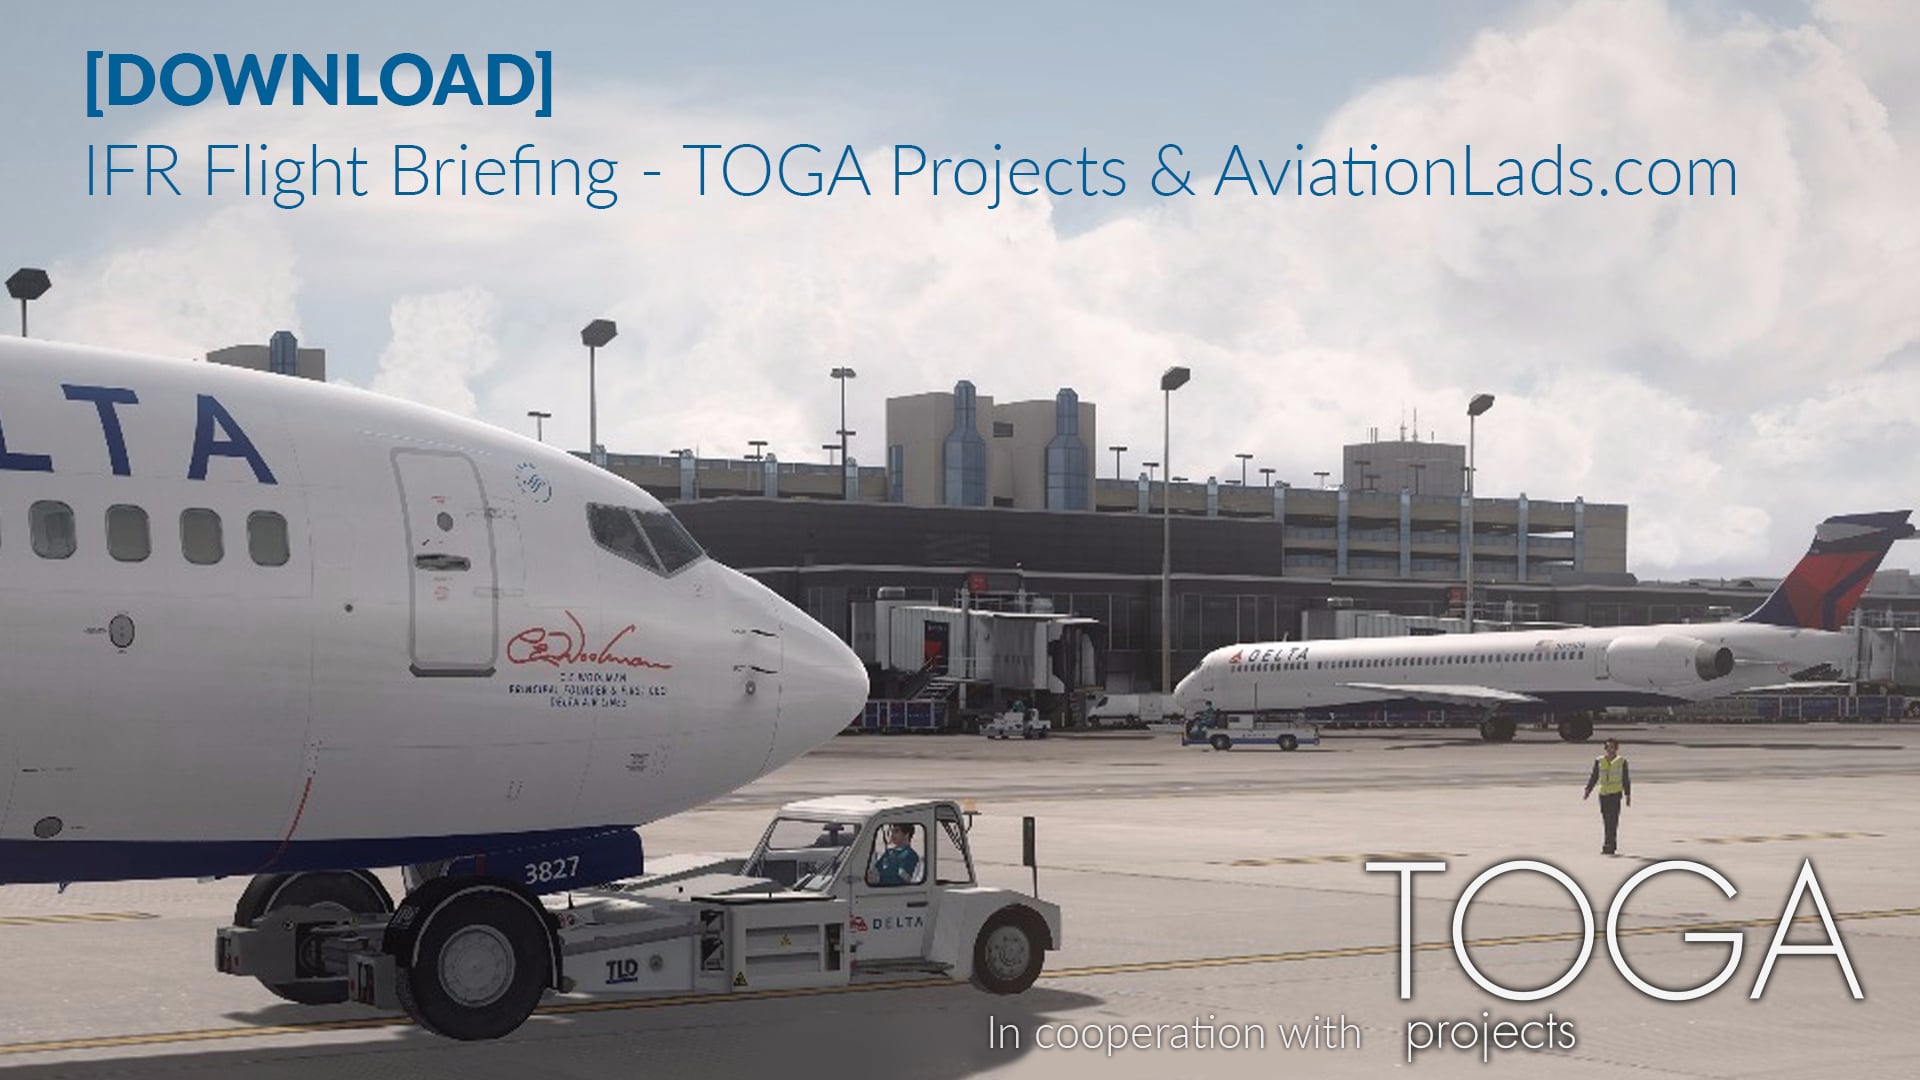 [DOWNLOAD] IFR Briefing Document | TOGA Projects